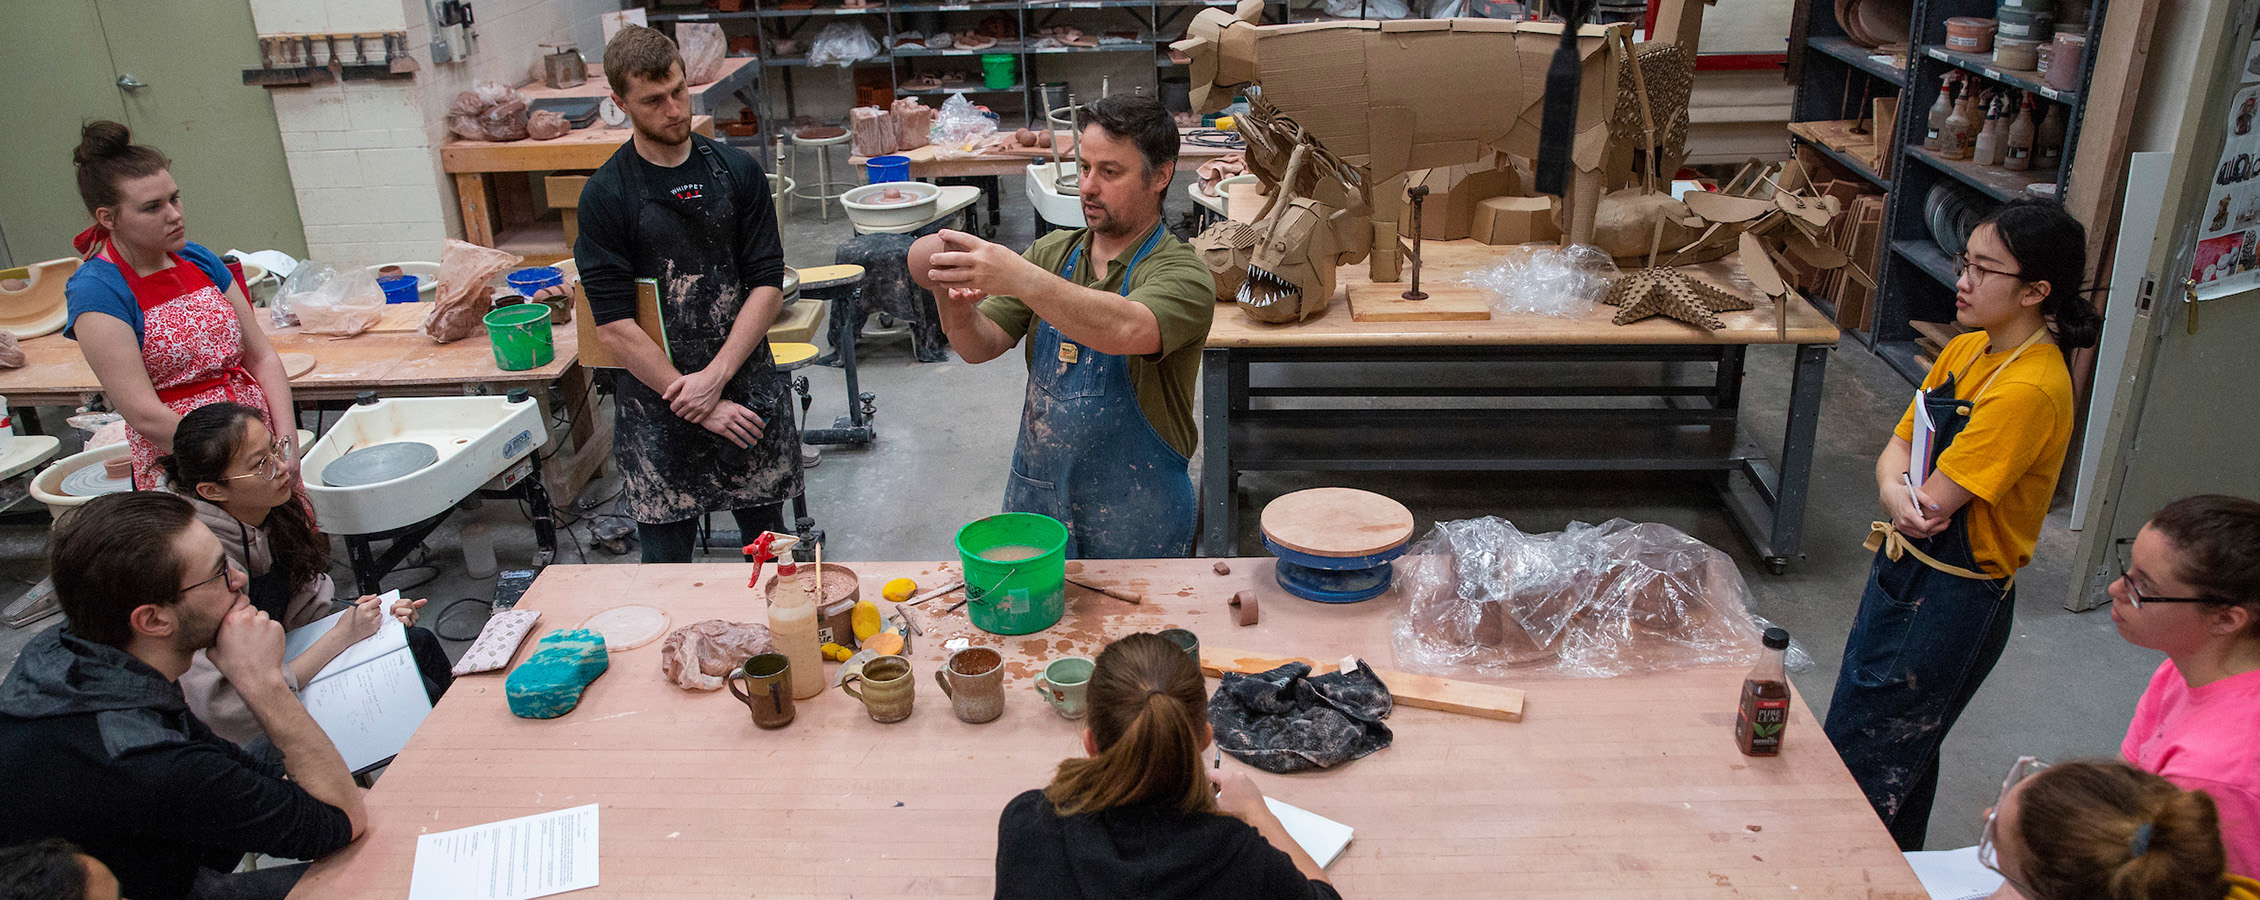 Instructor teaching students ceramics class in art studio with large table